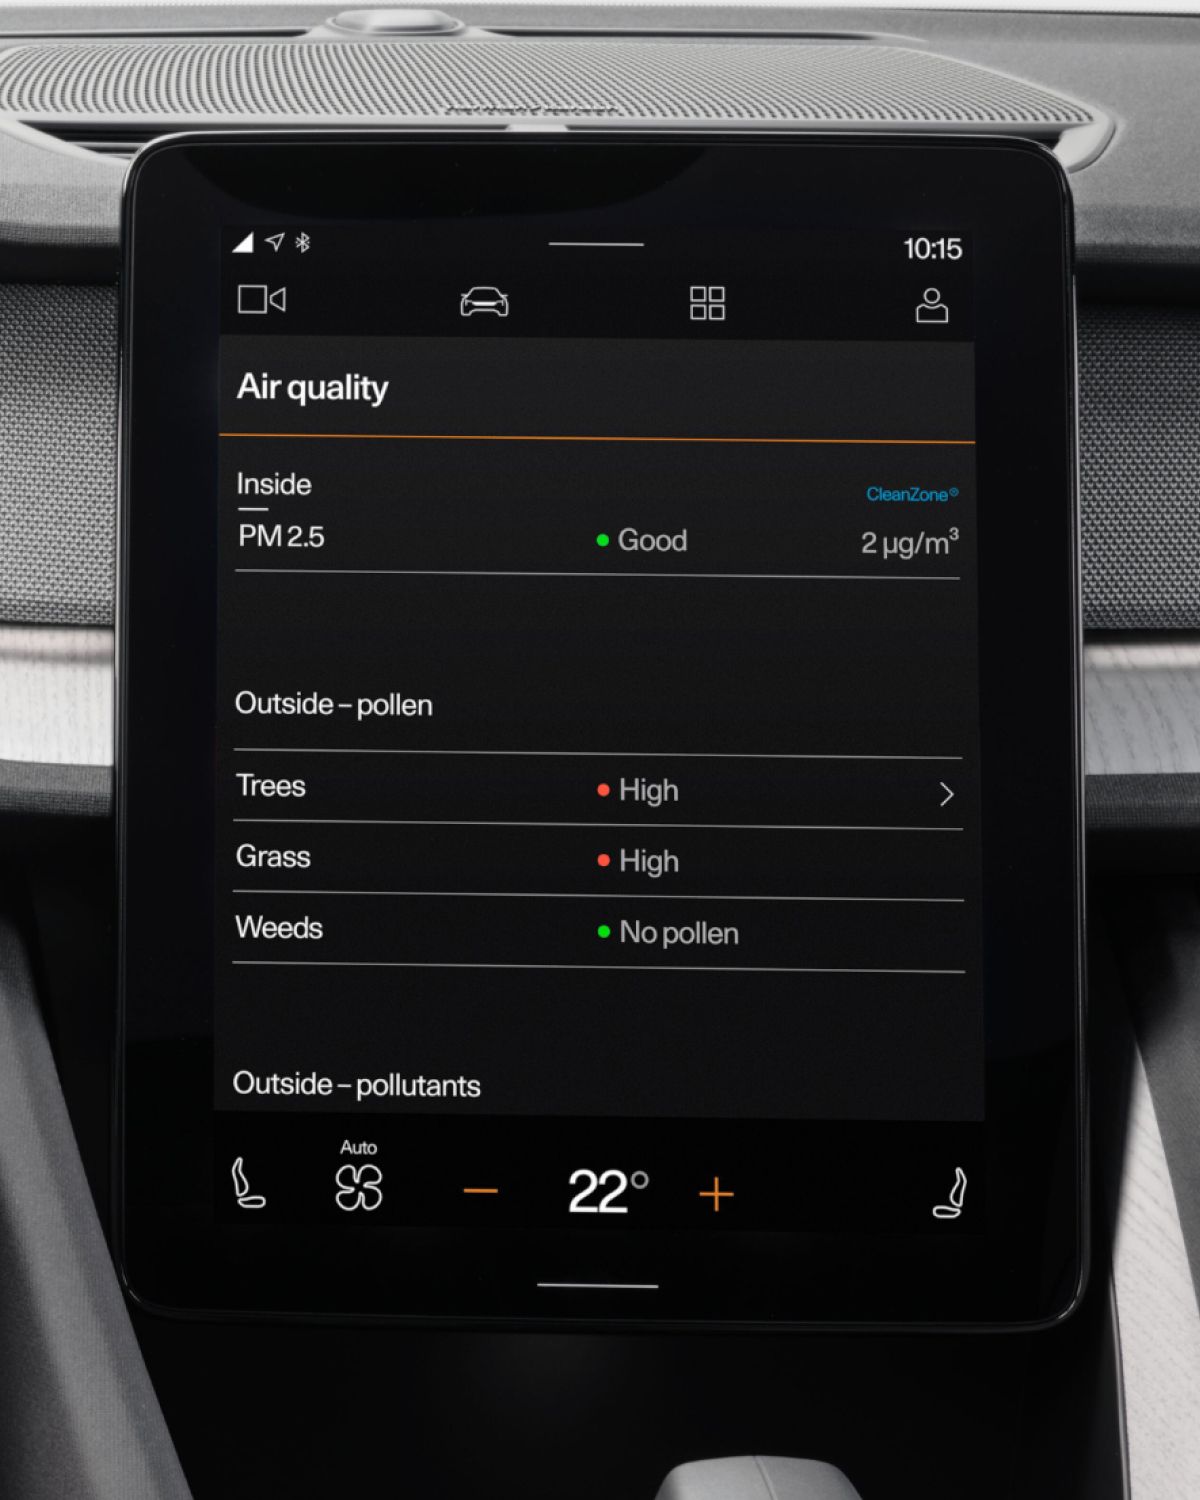 A big tablet screen showing the air quality inside the car